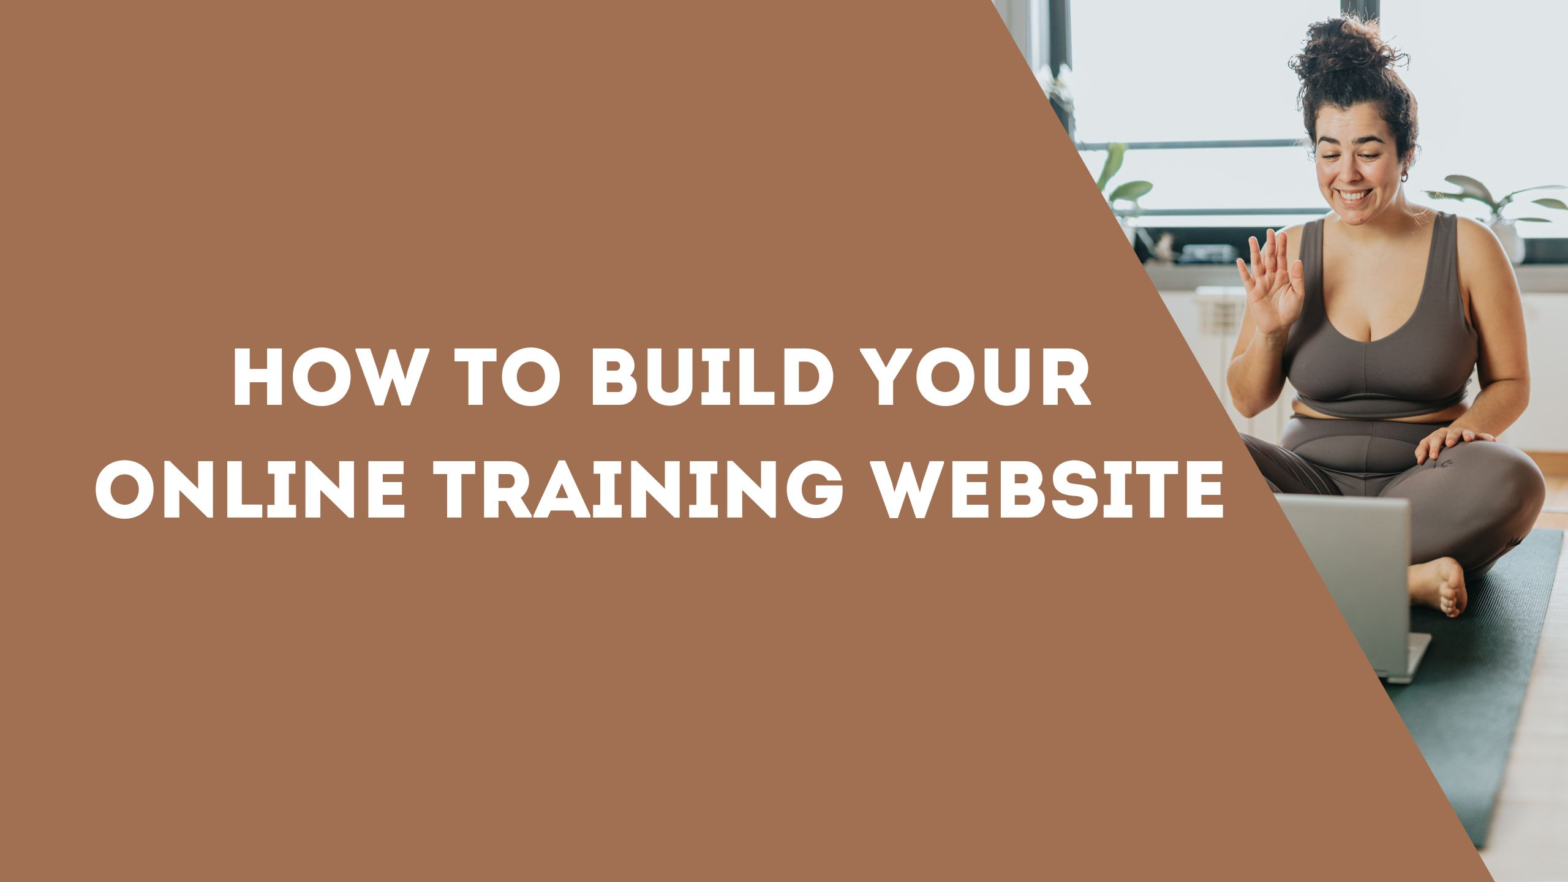 How to build your online training website